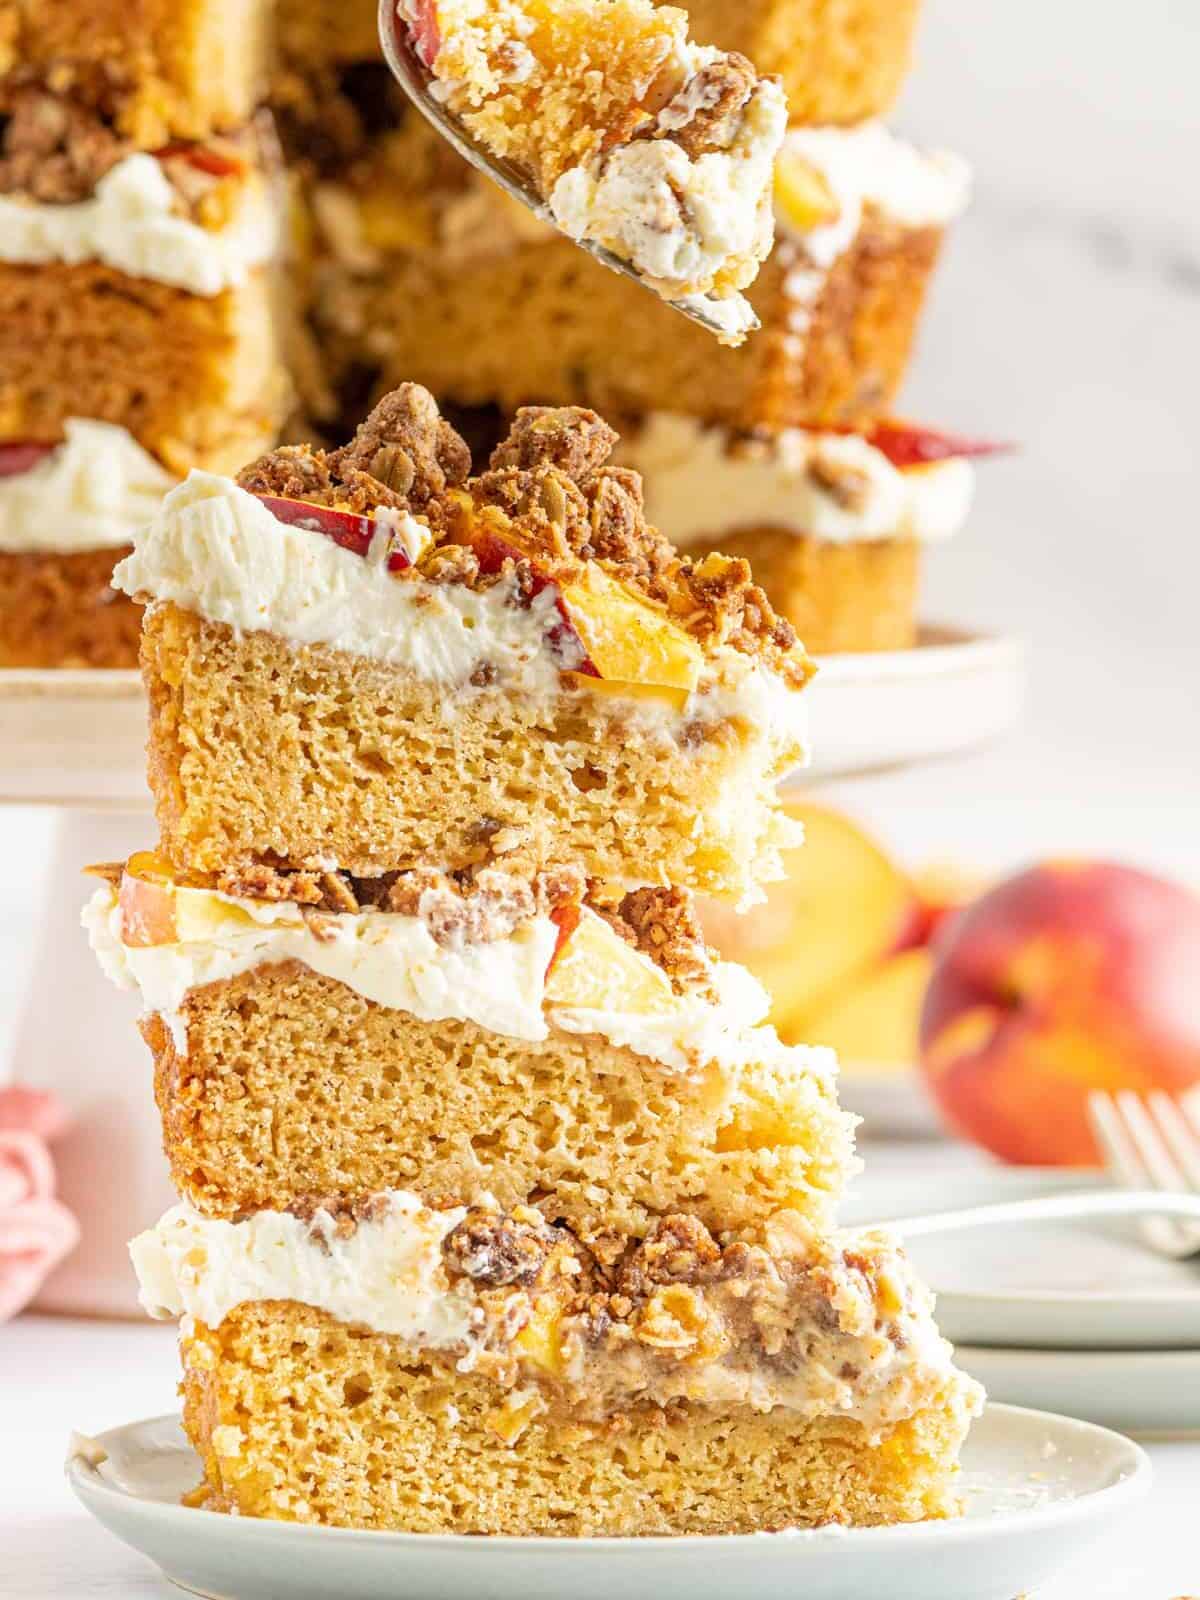 slice of triple layered peach cobbler cake on a plate, in front of a whole cake on a cake stand